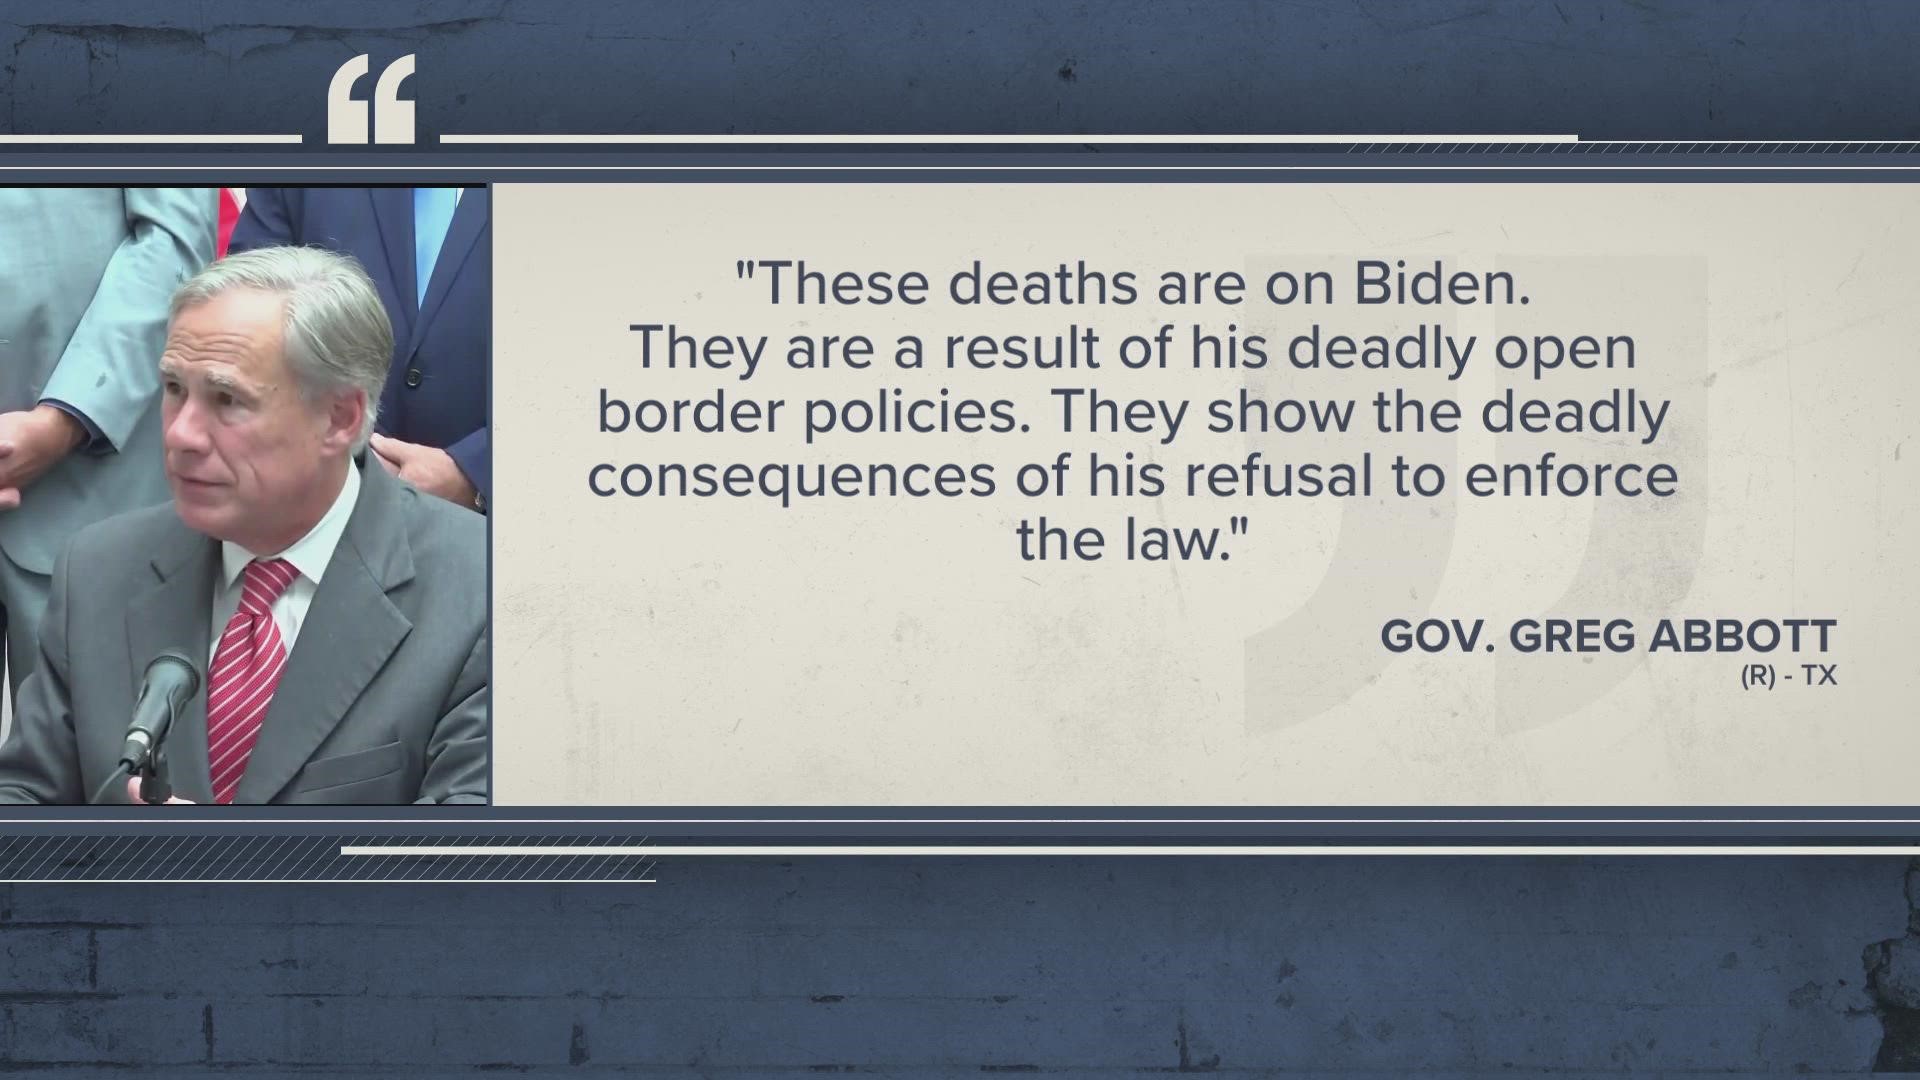 Gov. Abbott blamed President Biden's border policies, while Rep. Joaquin Castro called for an end to Title 42, saying it puts desperate people in grave danger.